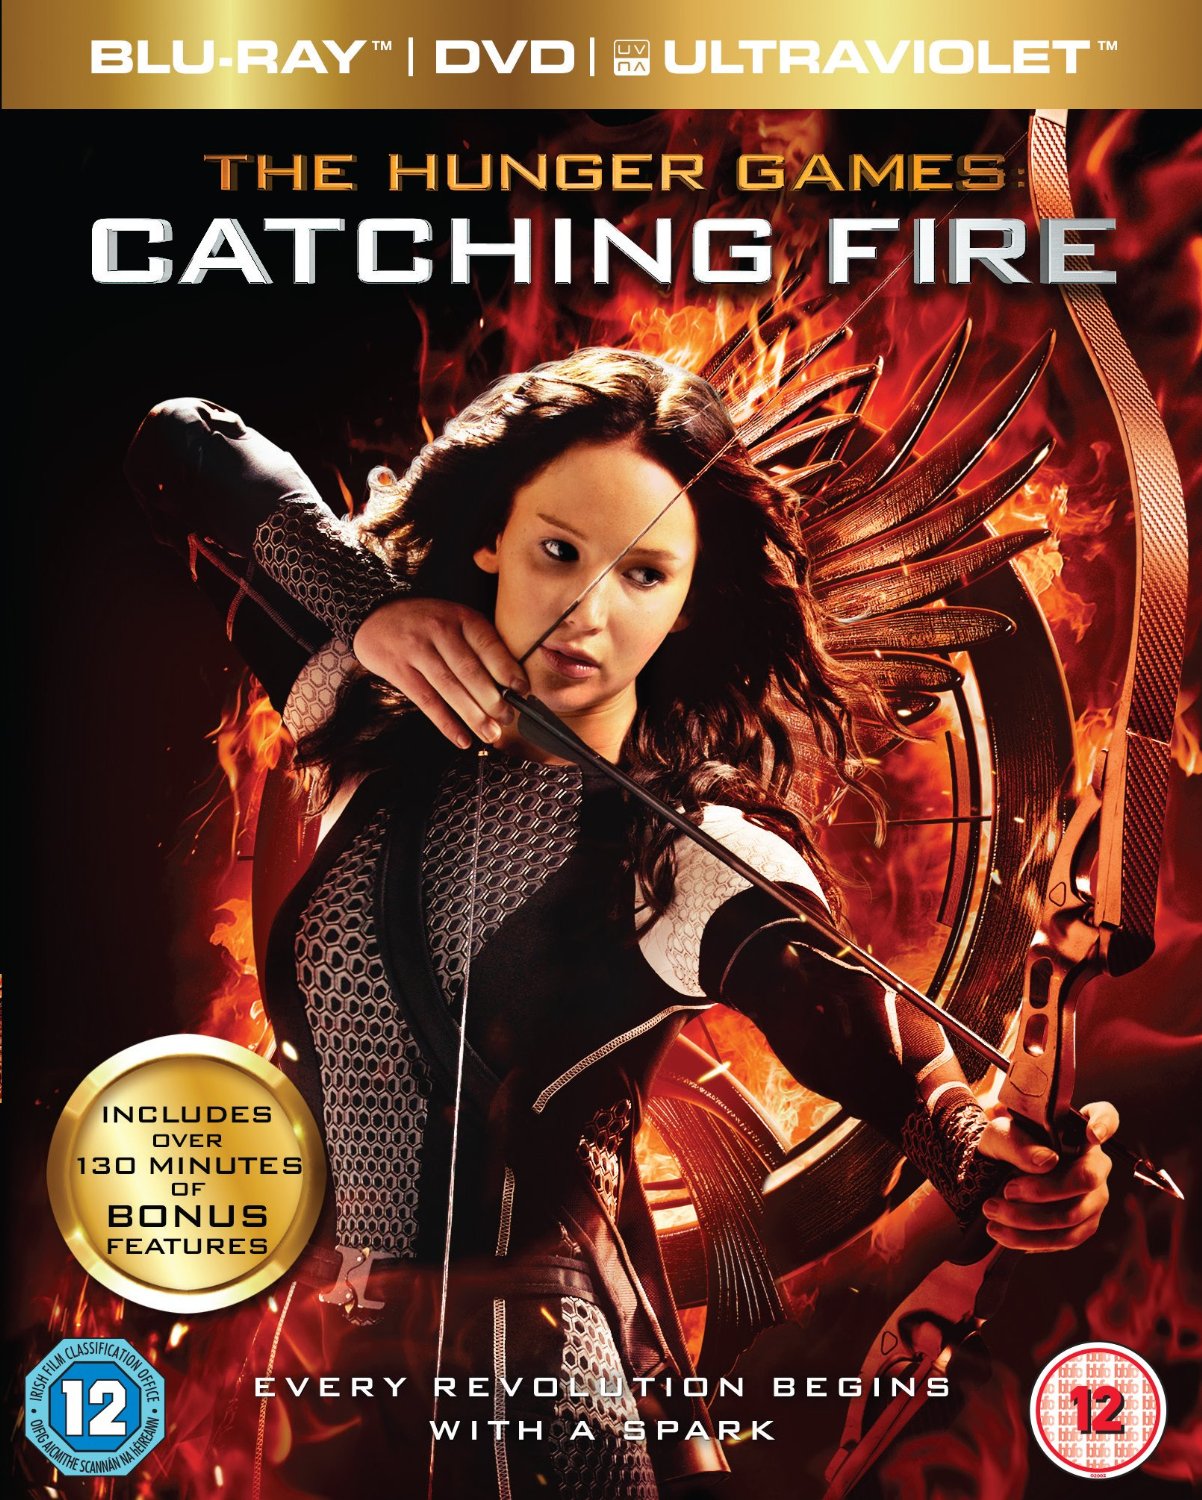 The Hunger Games: Catching Fire' Movie Review